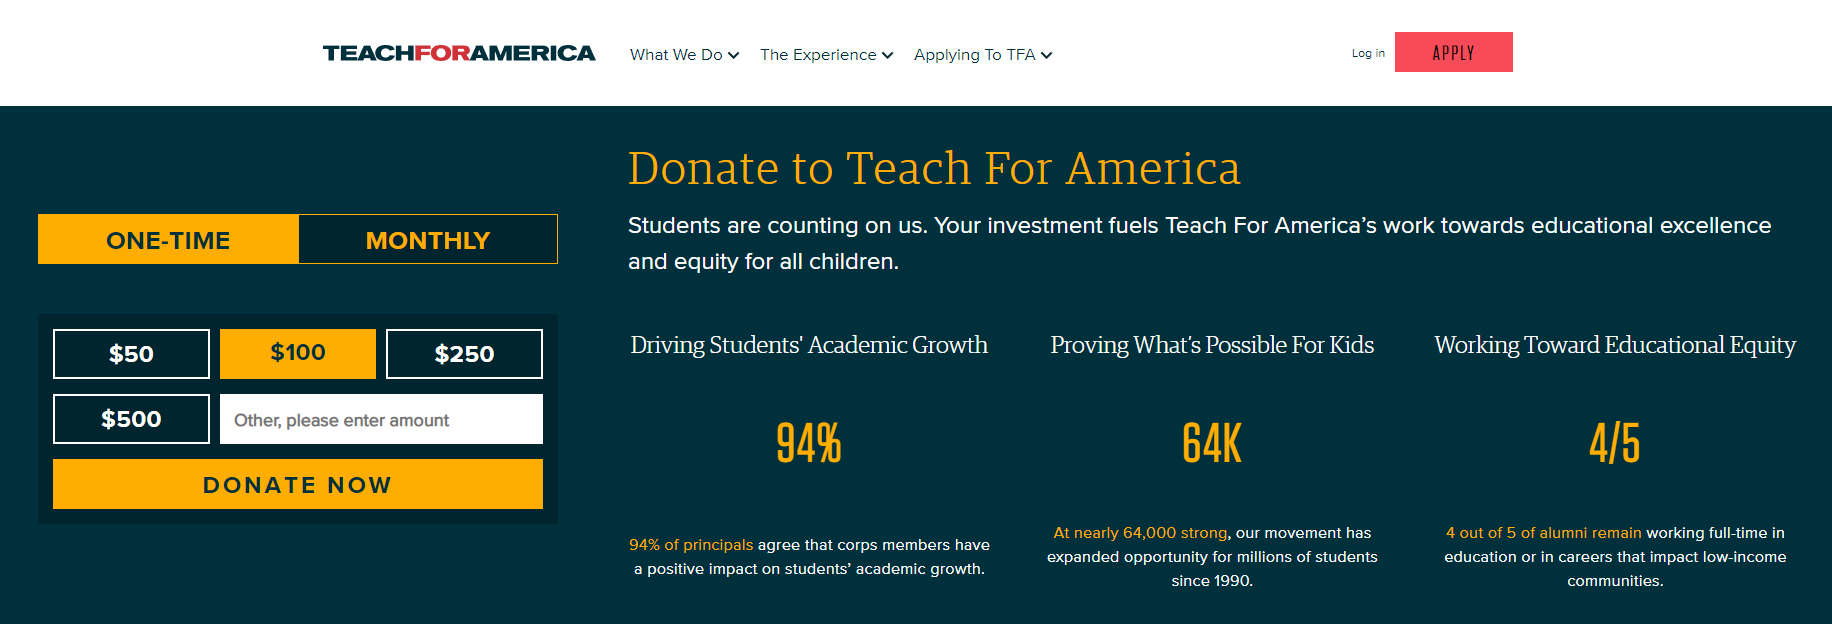 Teach for America example accept donations